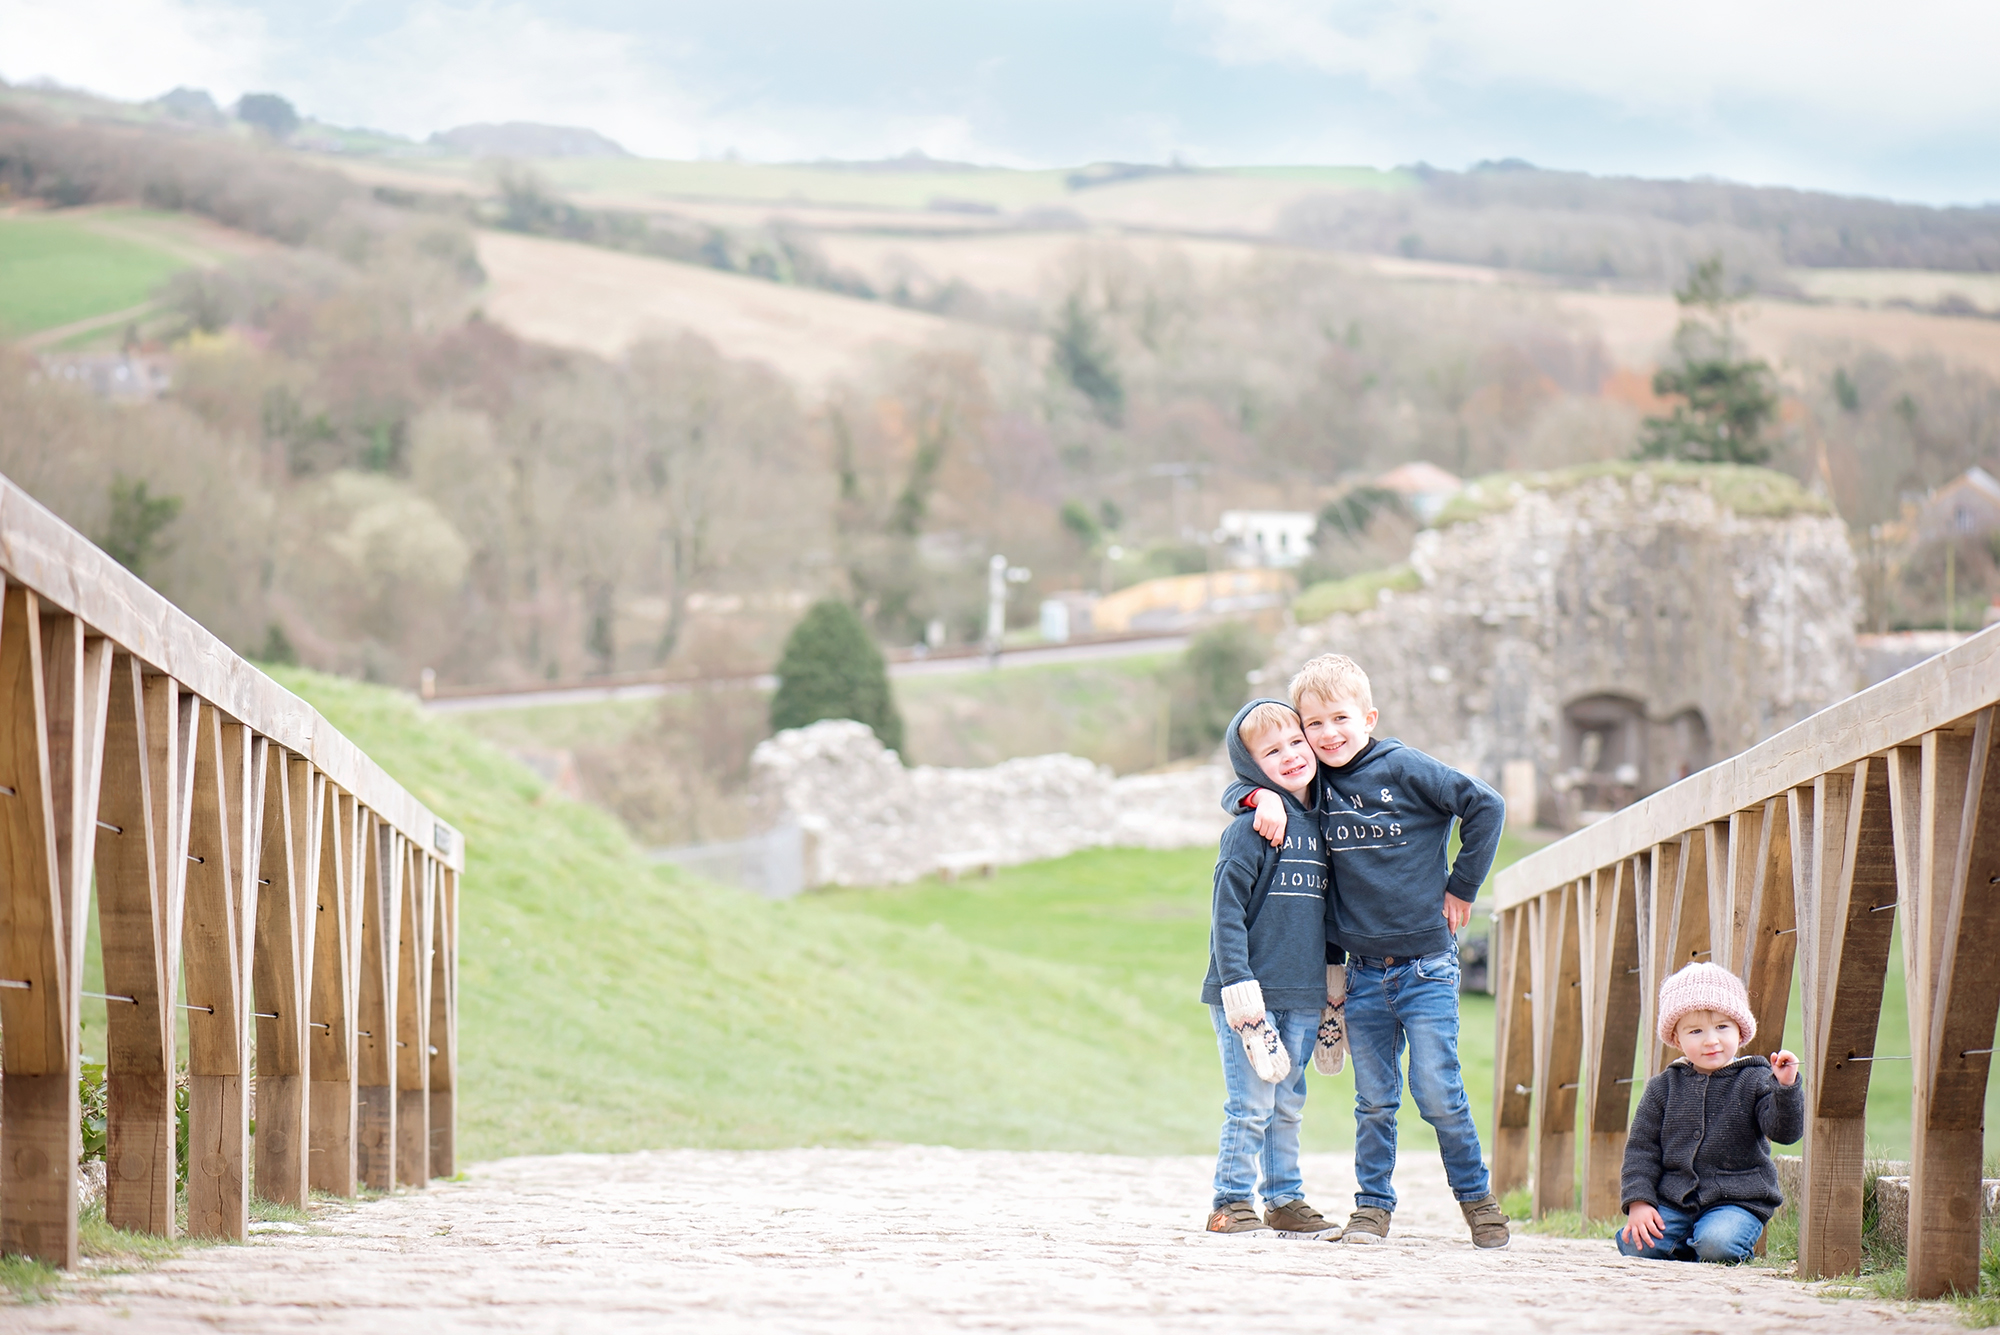 IN THE FAMOUS STEPS OF ENID BLYTON’S FIVE – A TRIP TO CORFE CASTLE